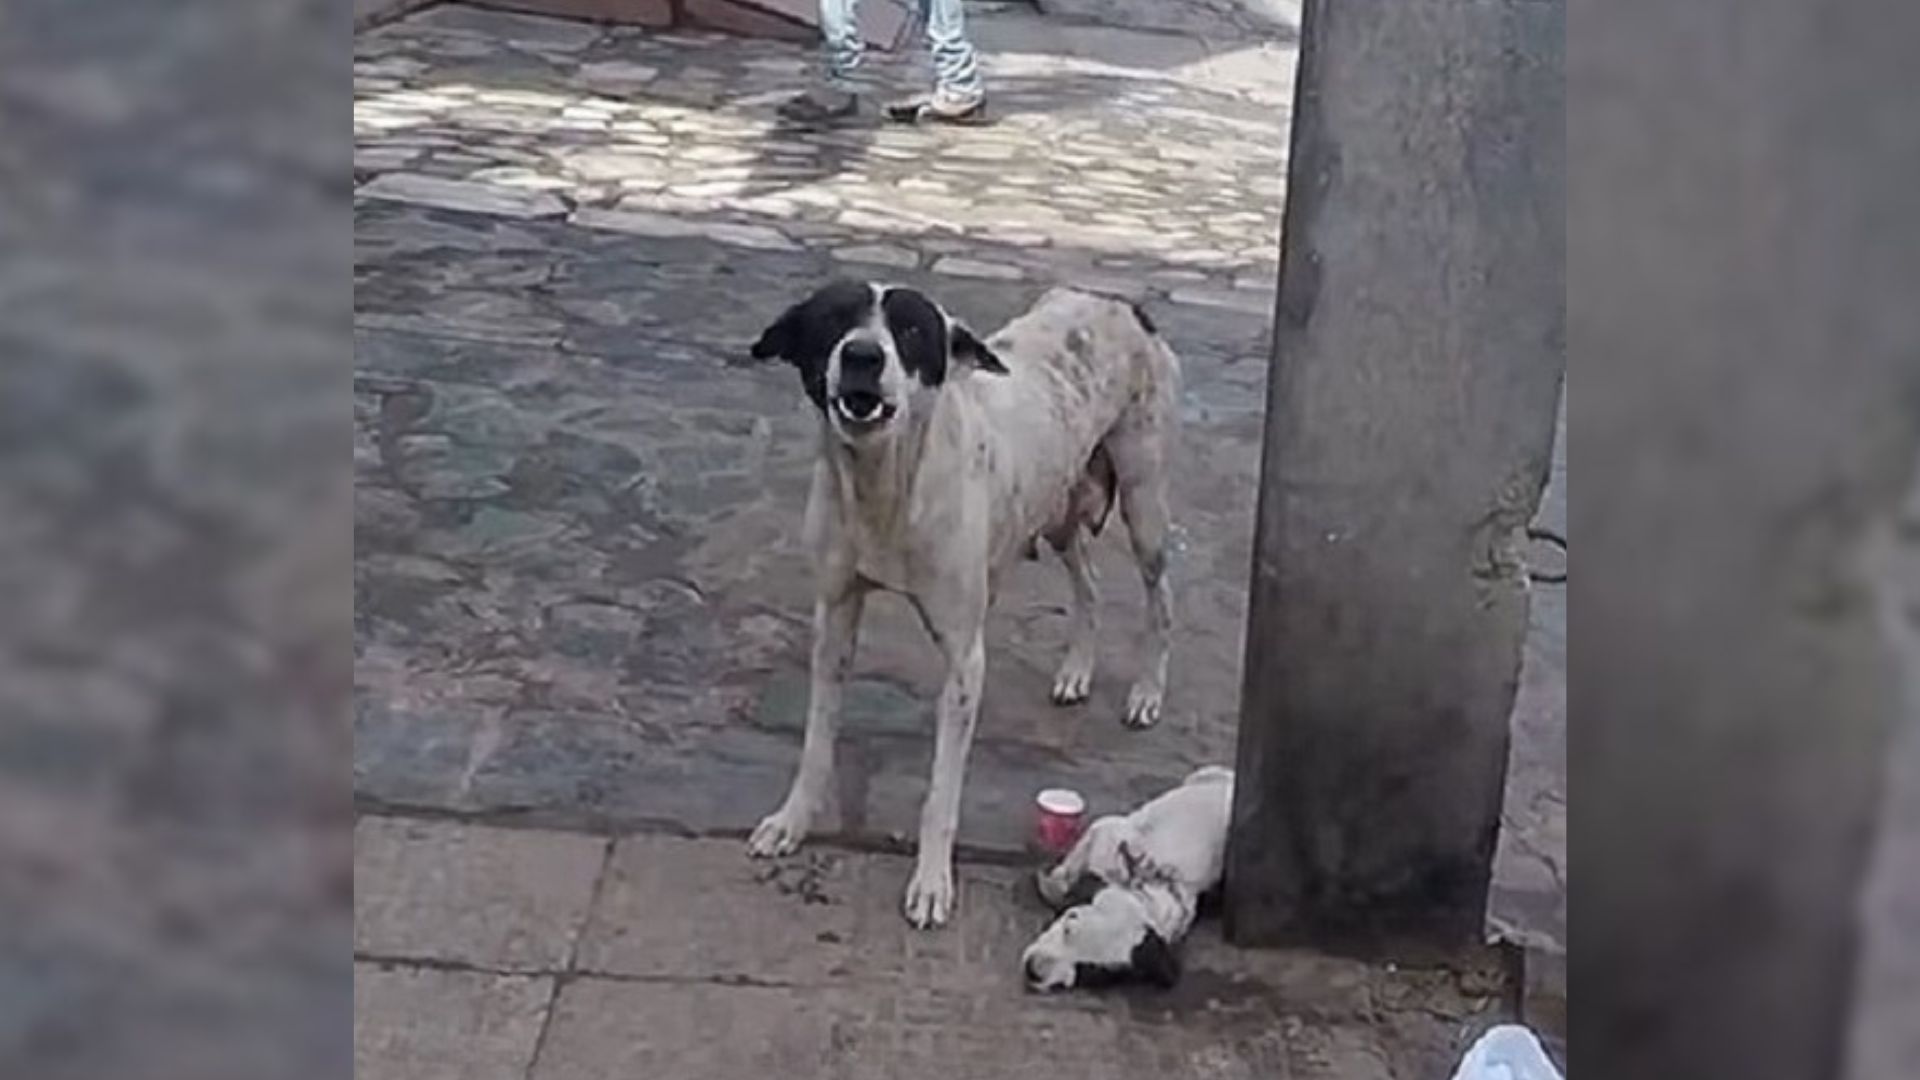 A Scared Mama Dog Kept Crying For Help Until Rescuers Stepped In To Save Her Injured Little Baby